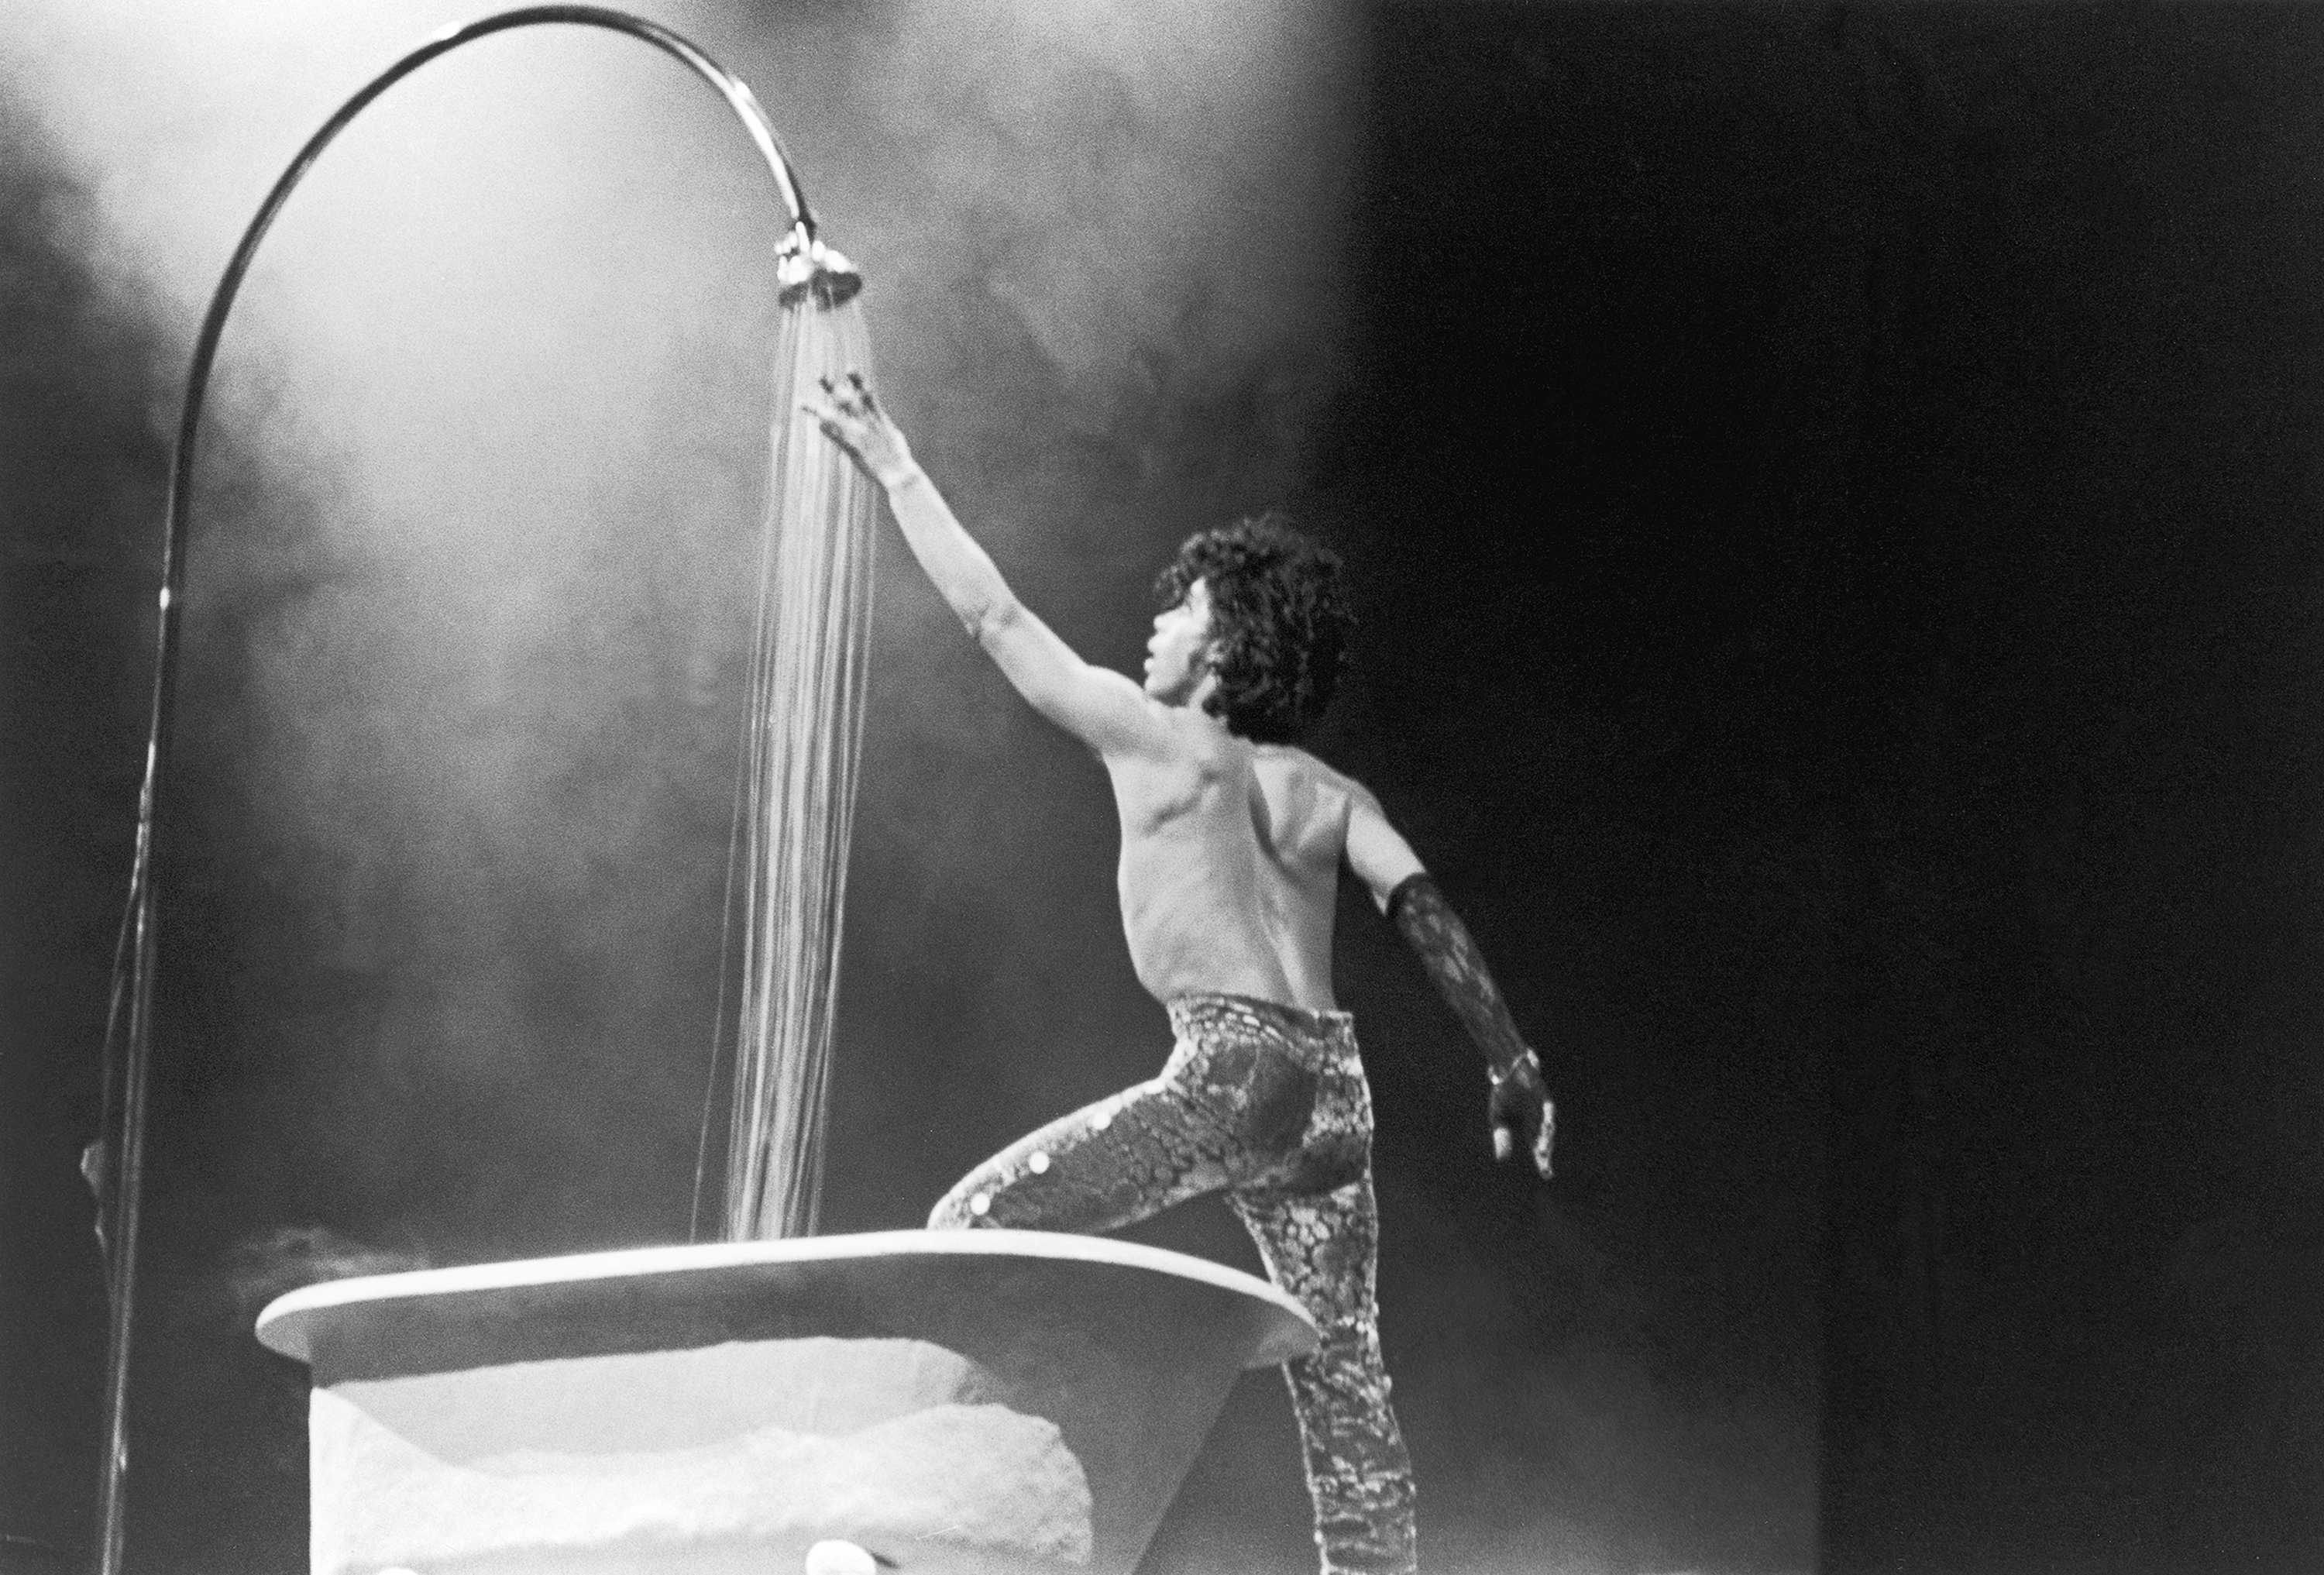 Black and white photograph of Prince performing on stage